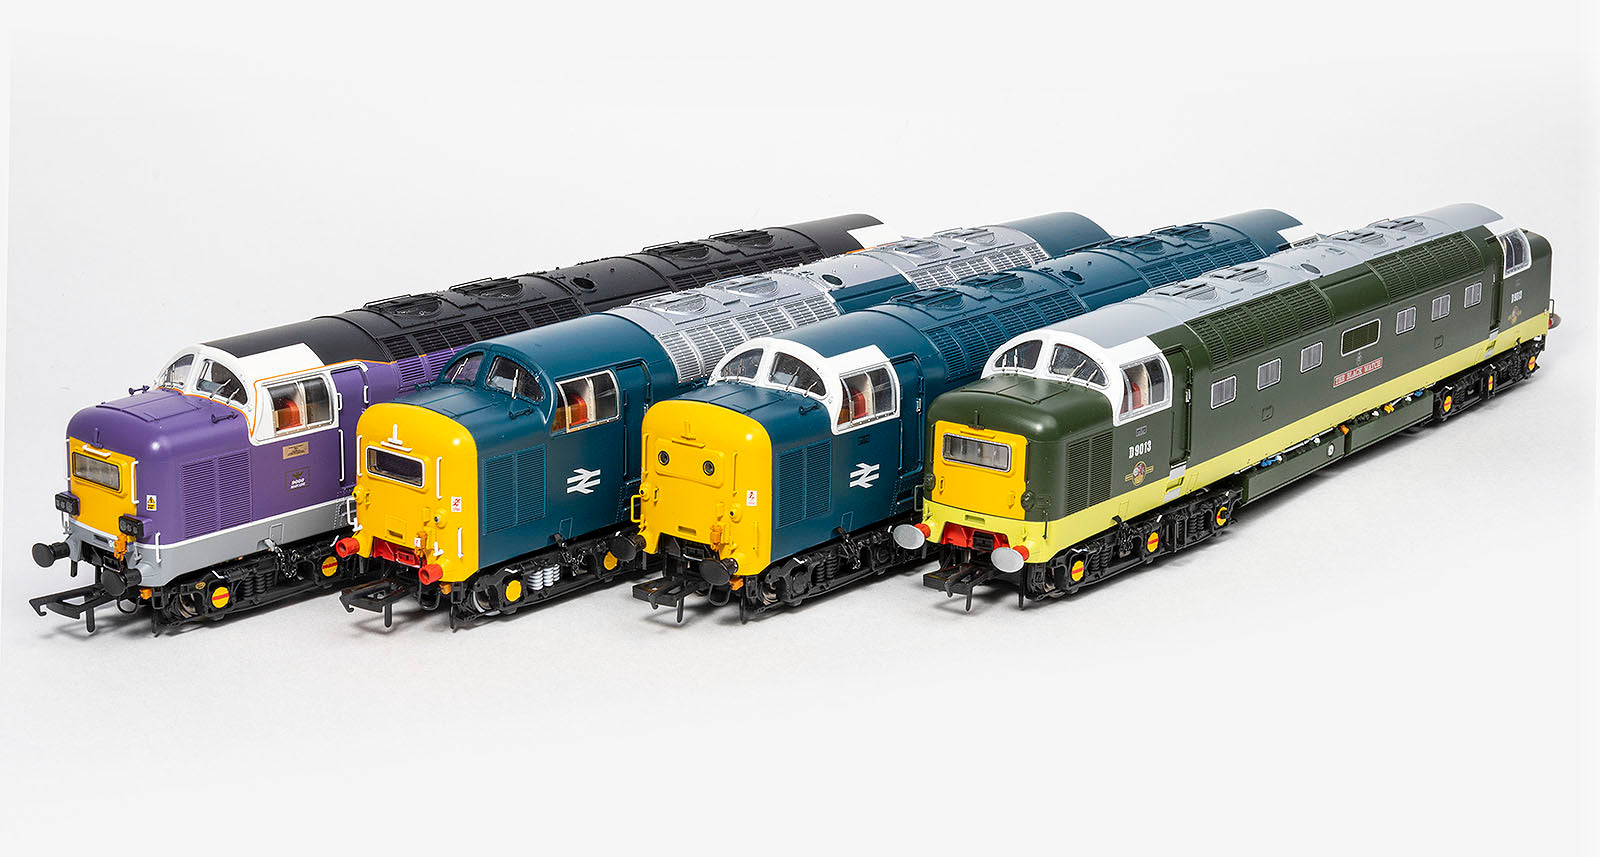 Decorated Deltic Update - February 2021